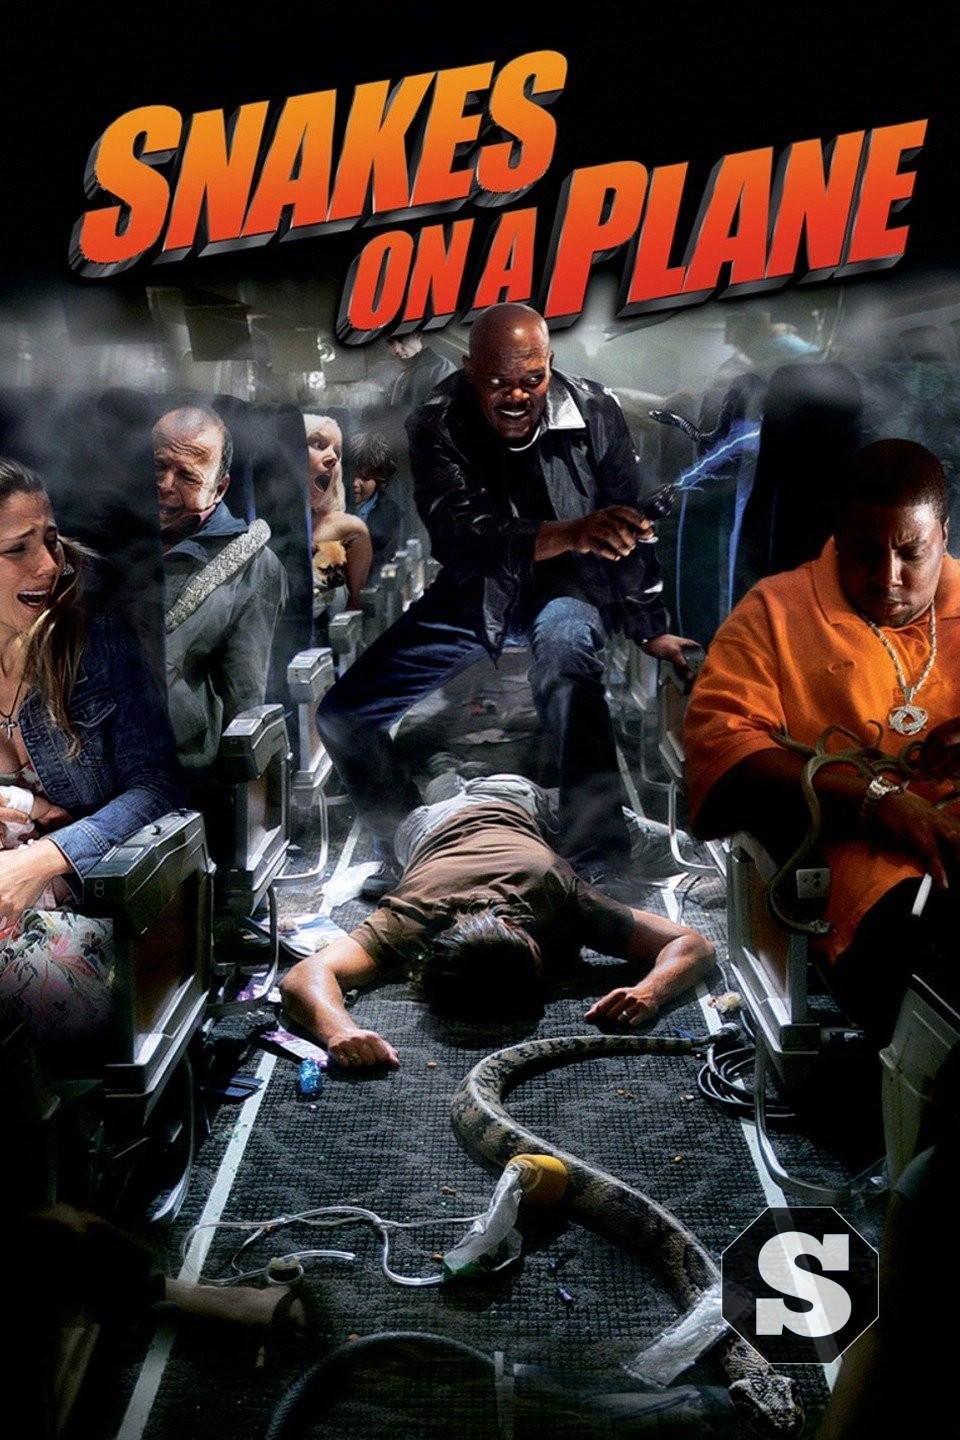 Snakes On A Plane (2006) Hollywood movie Download